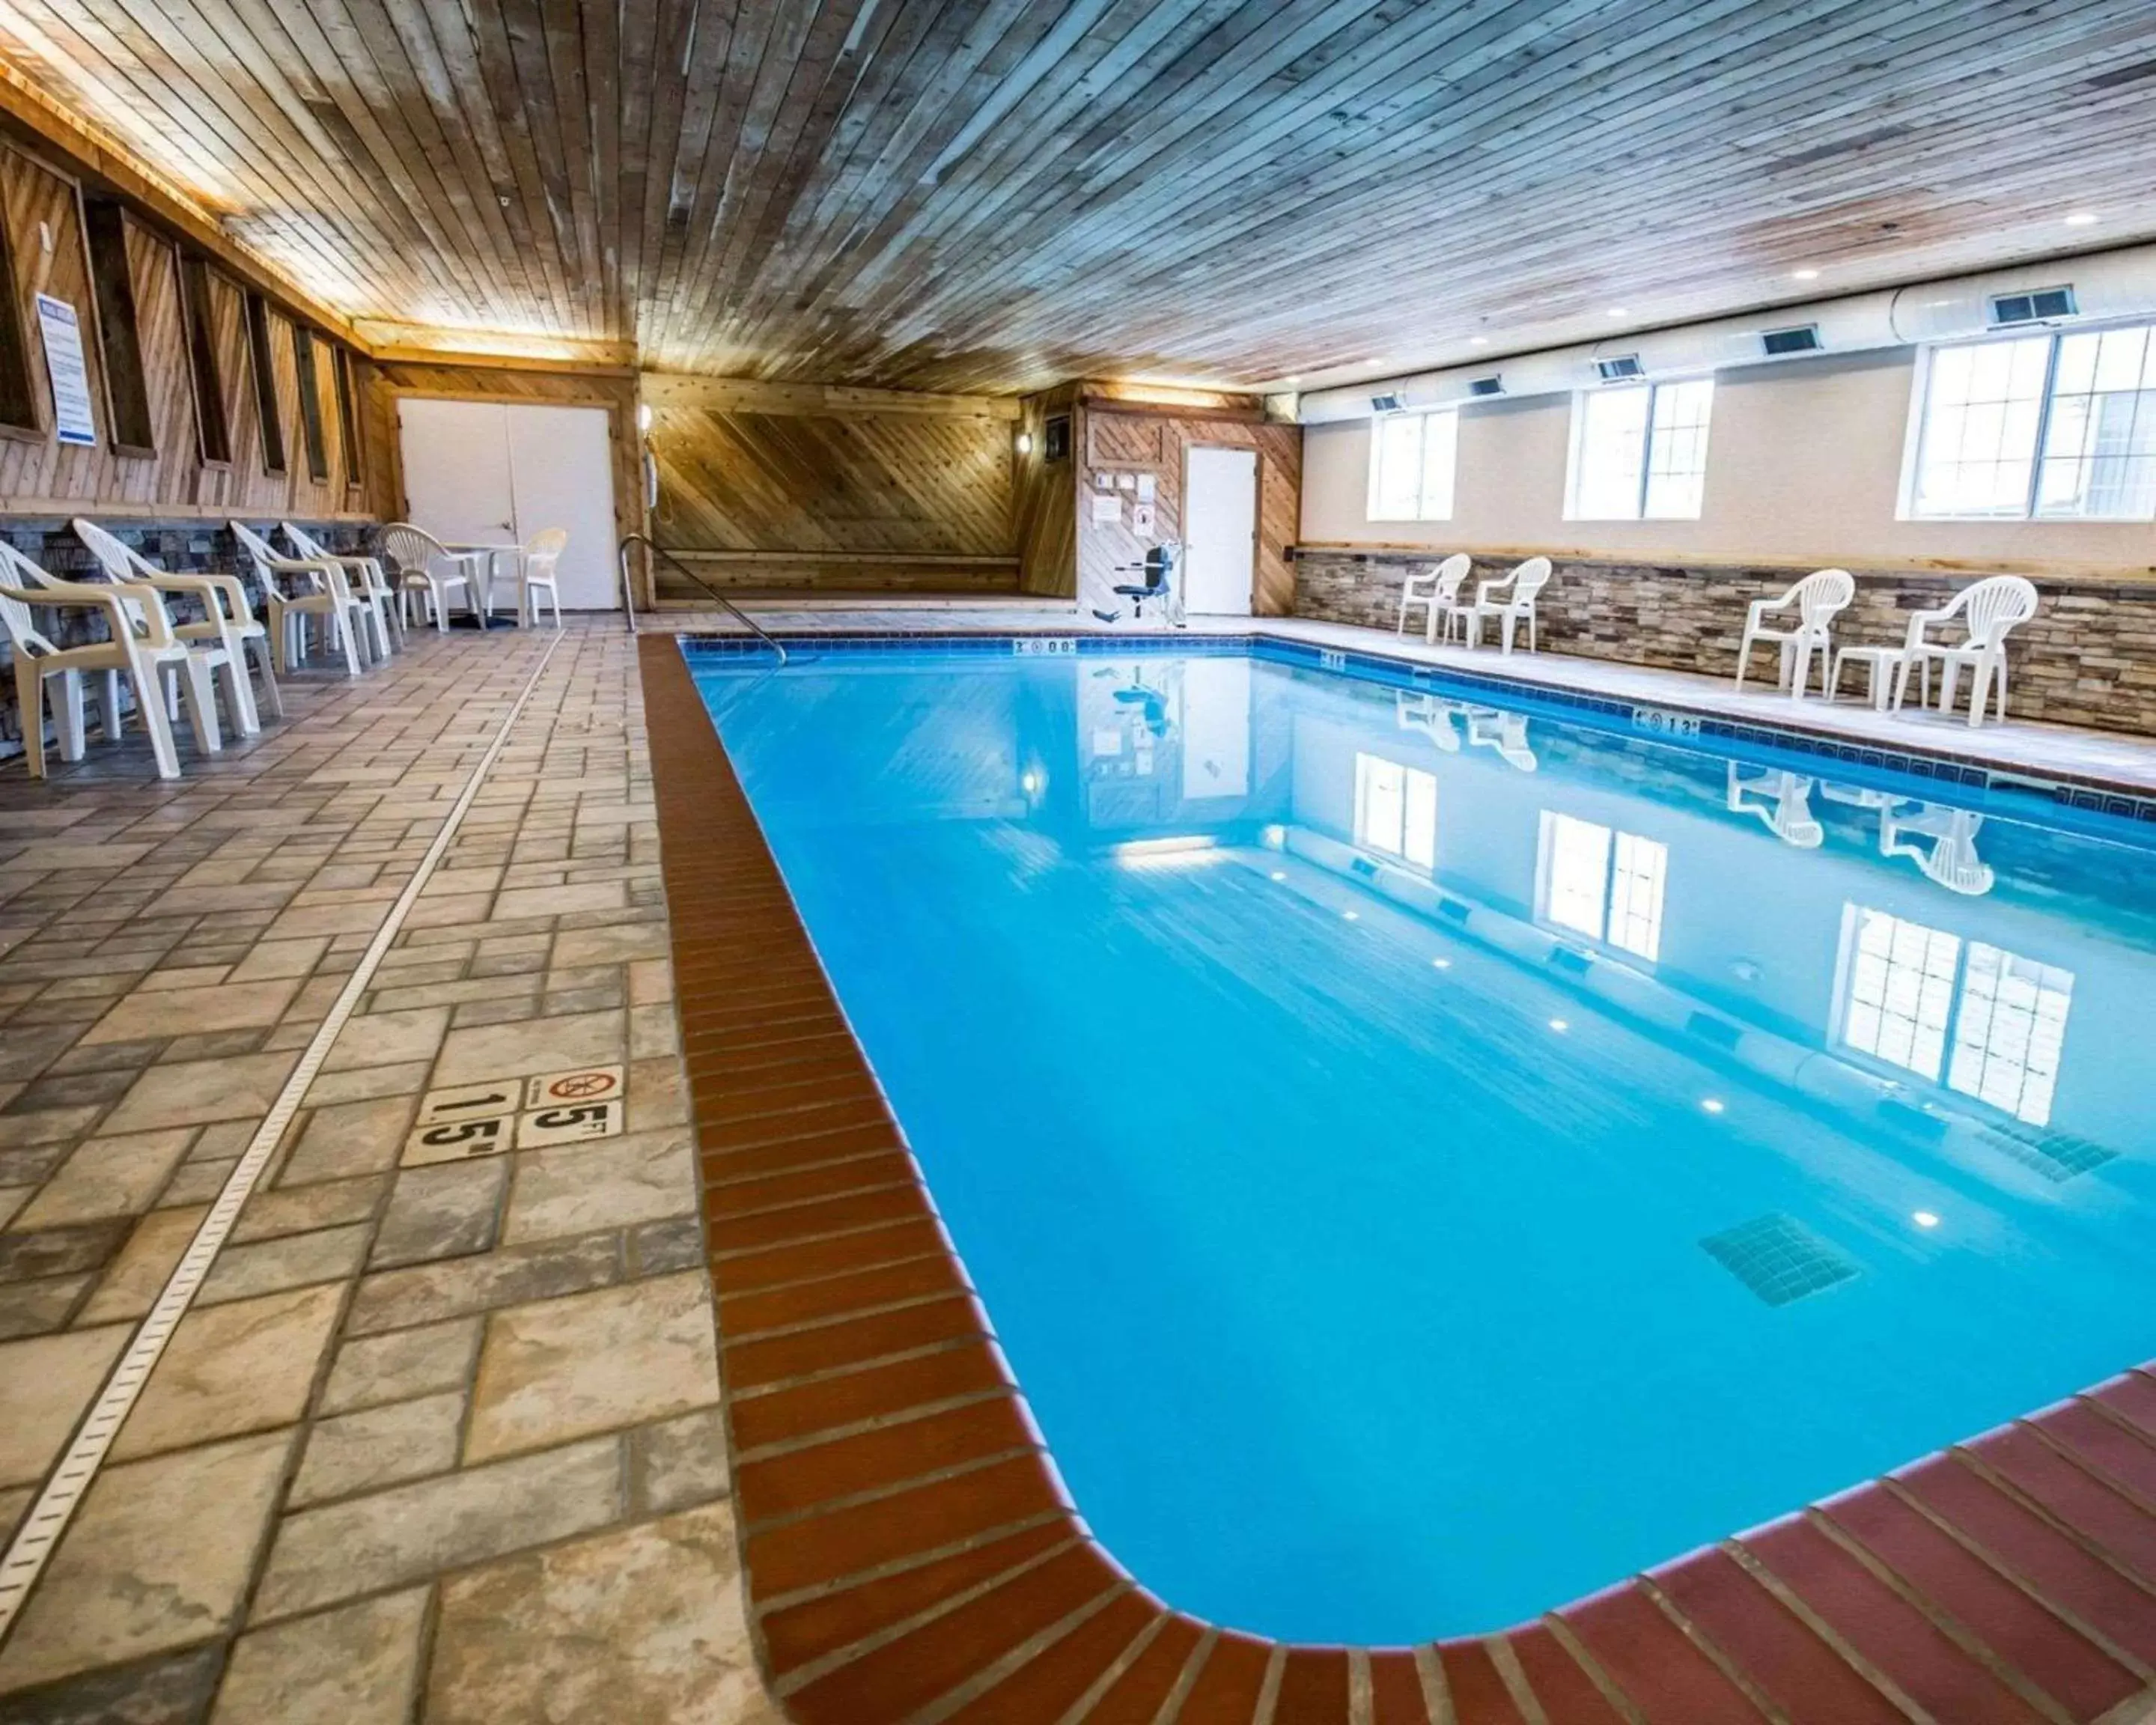 On site, Swimming Pool in Comfort Inn & Suites Riverview near Davenport and I-80